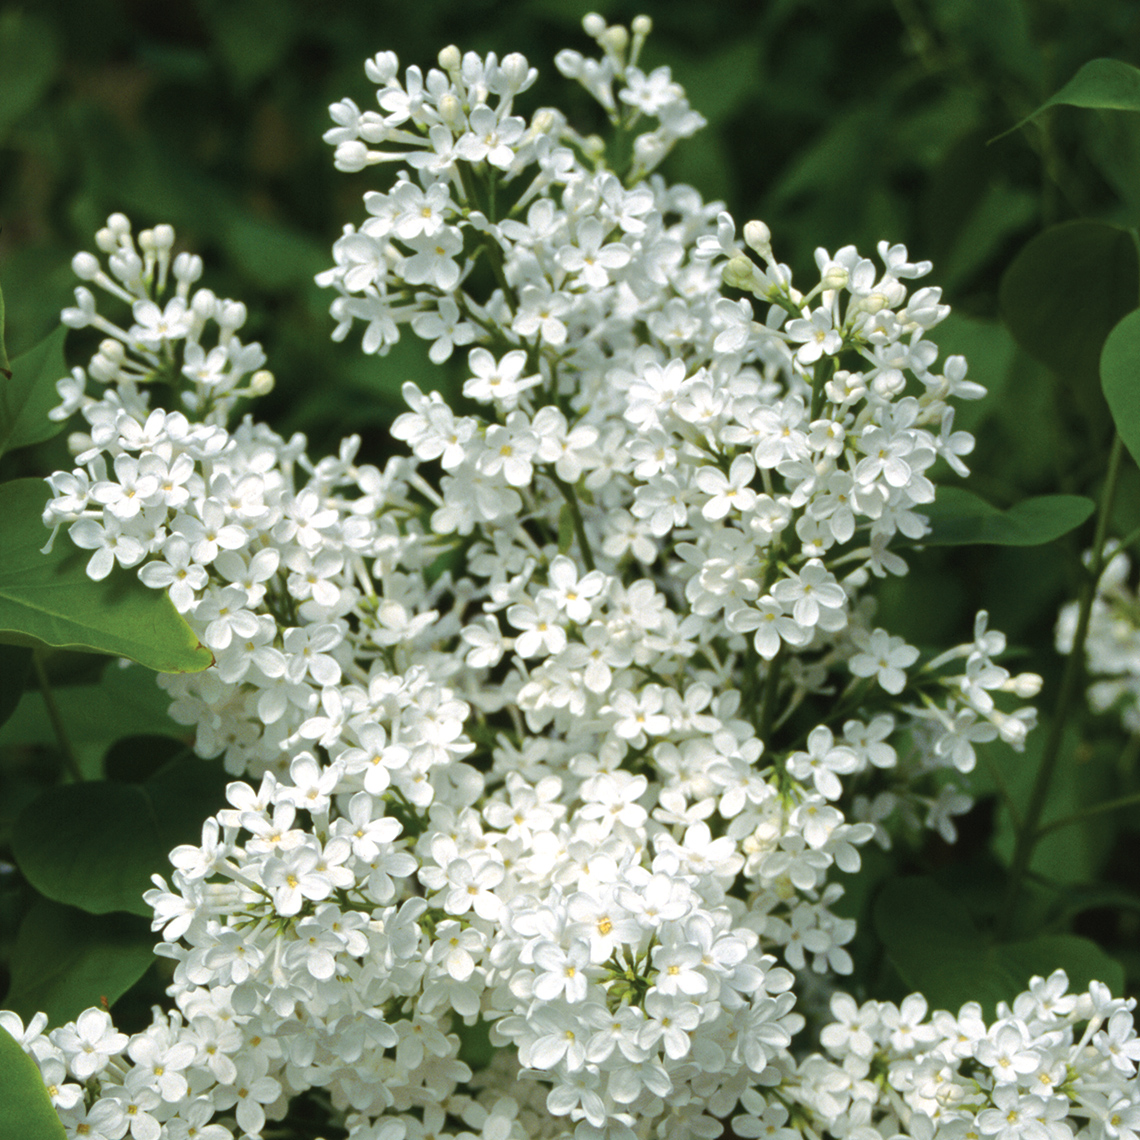 Delicate white flowers of Betsy Ross lilac shown up close